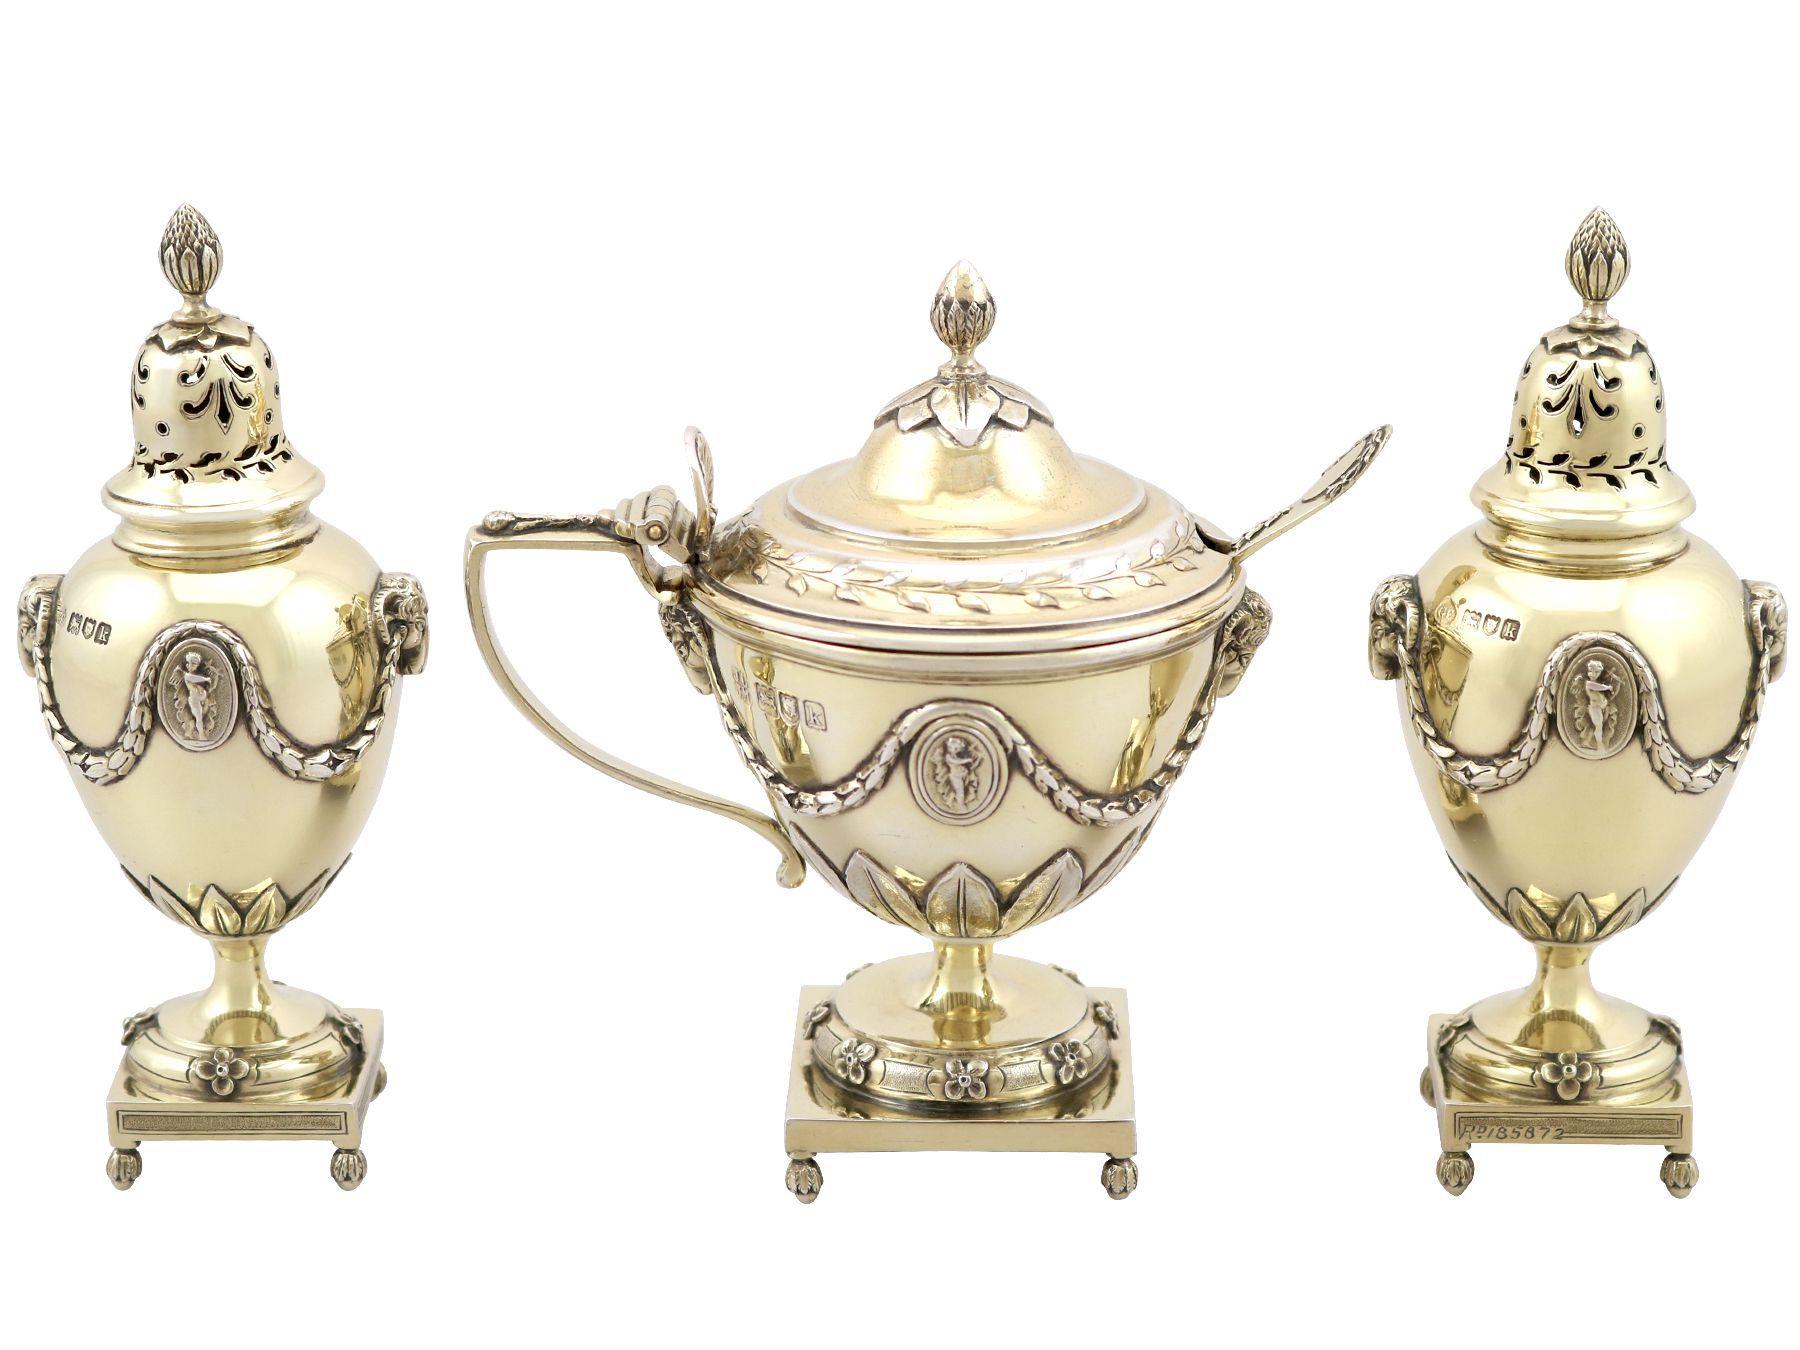 An exceptional, fine and impressive antique Edwardian English sterling silver gilt three piece condiment/cruet set - boxed; an addition to our dining silverware collection.

This exceptional antique Edwardian English sterling silver condiment set